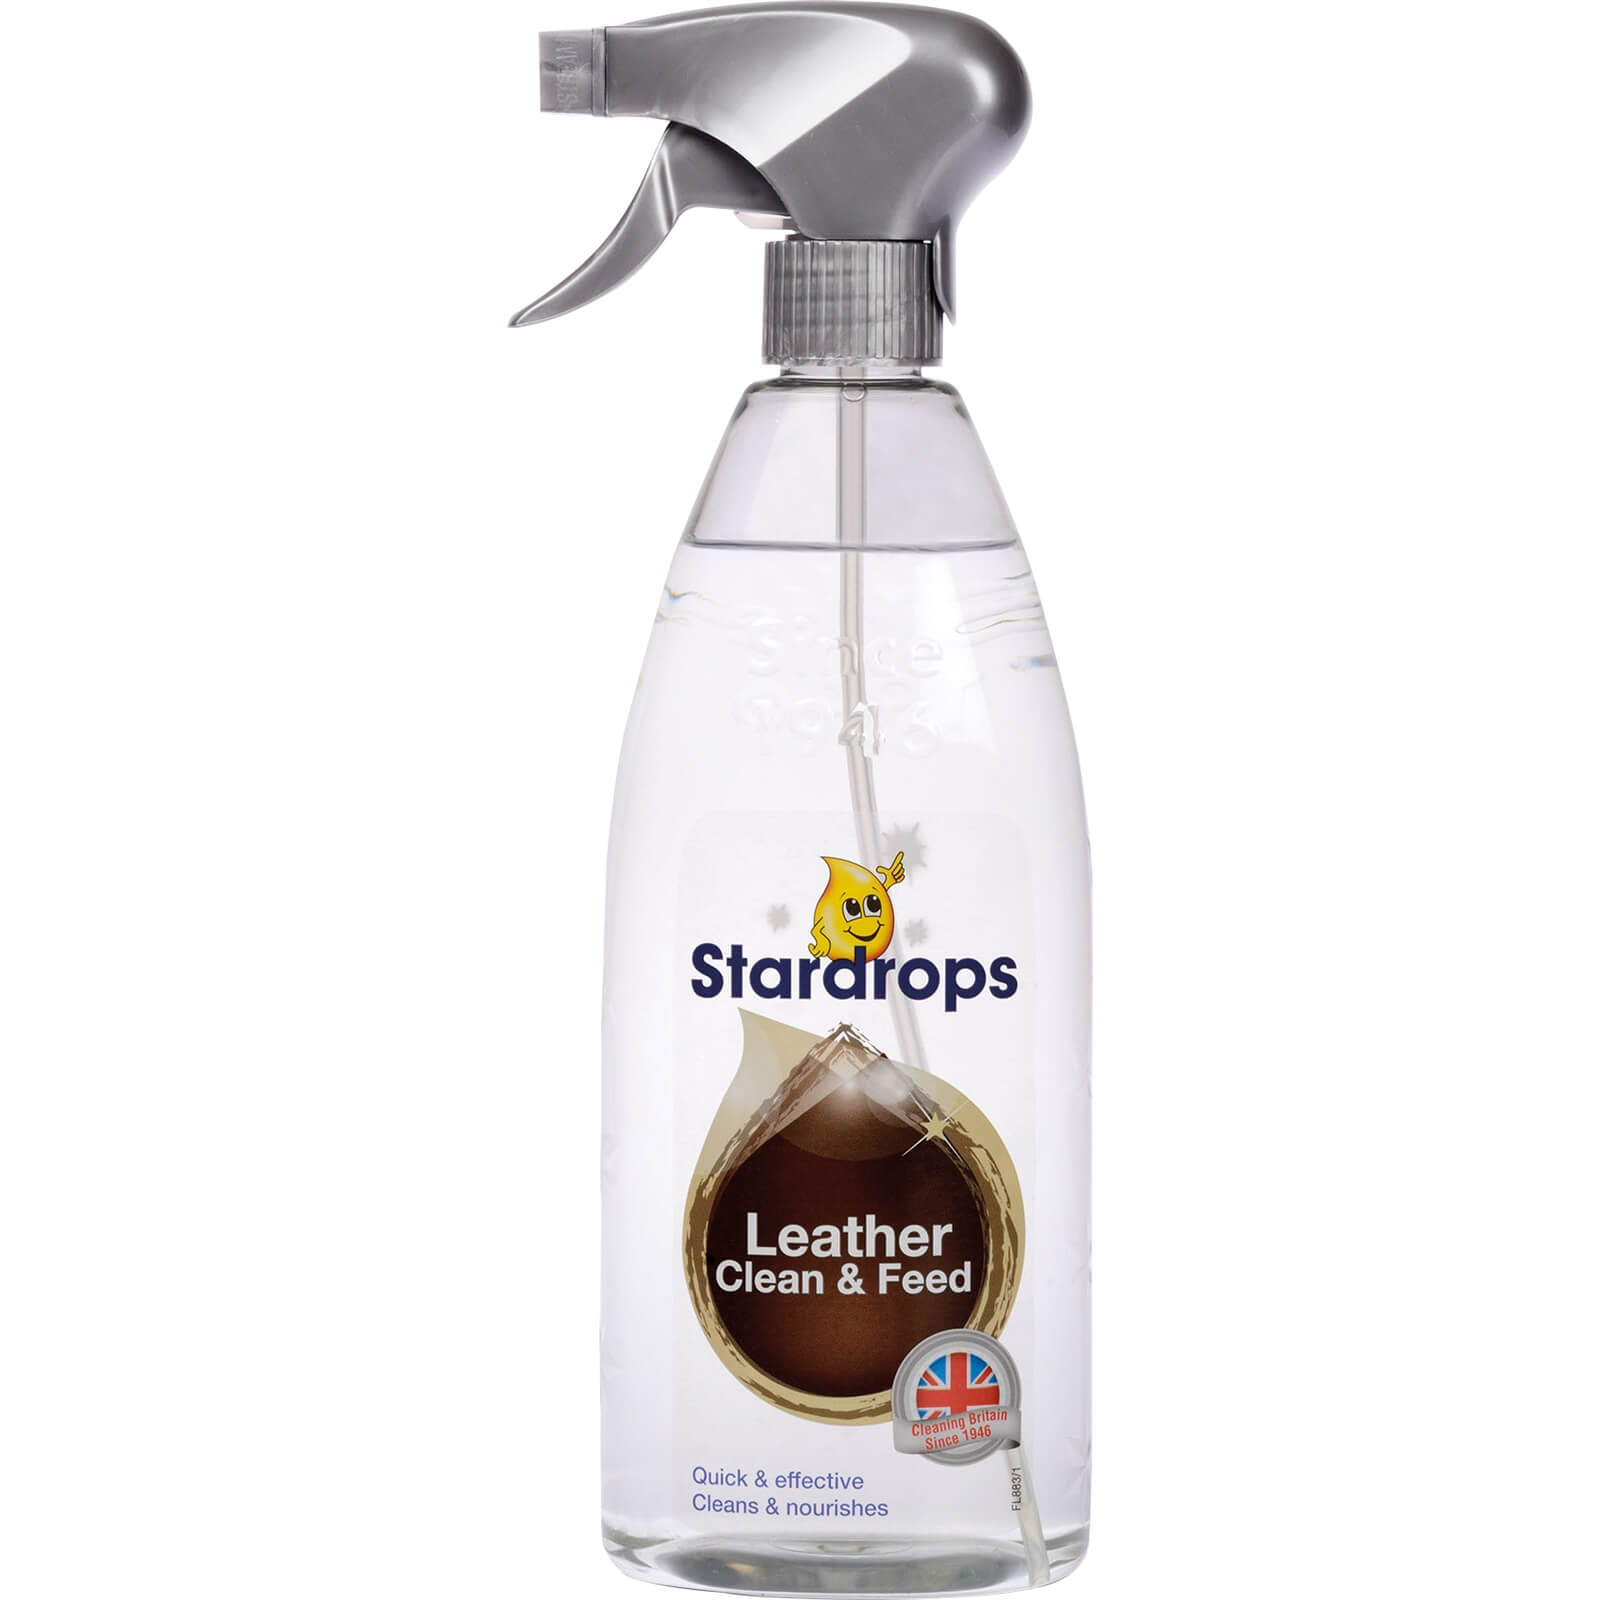 Stardrops Leather Clean & Feed